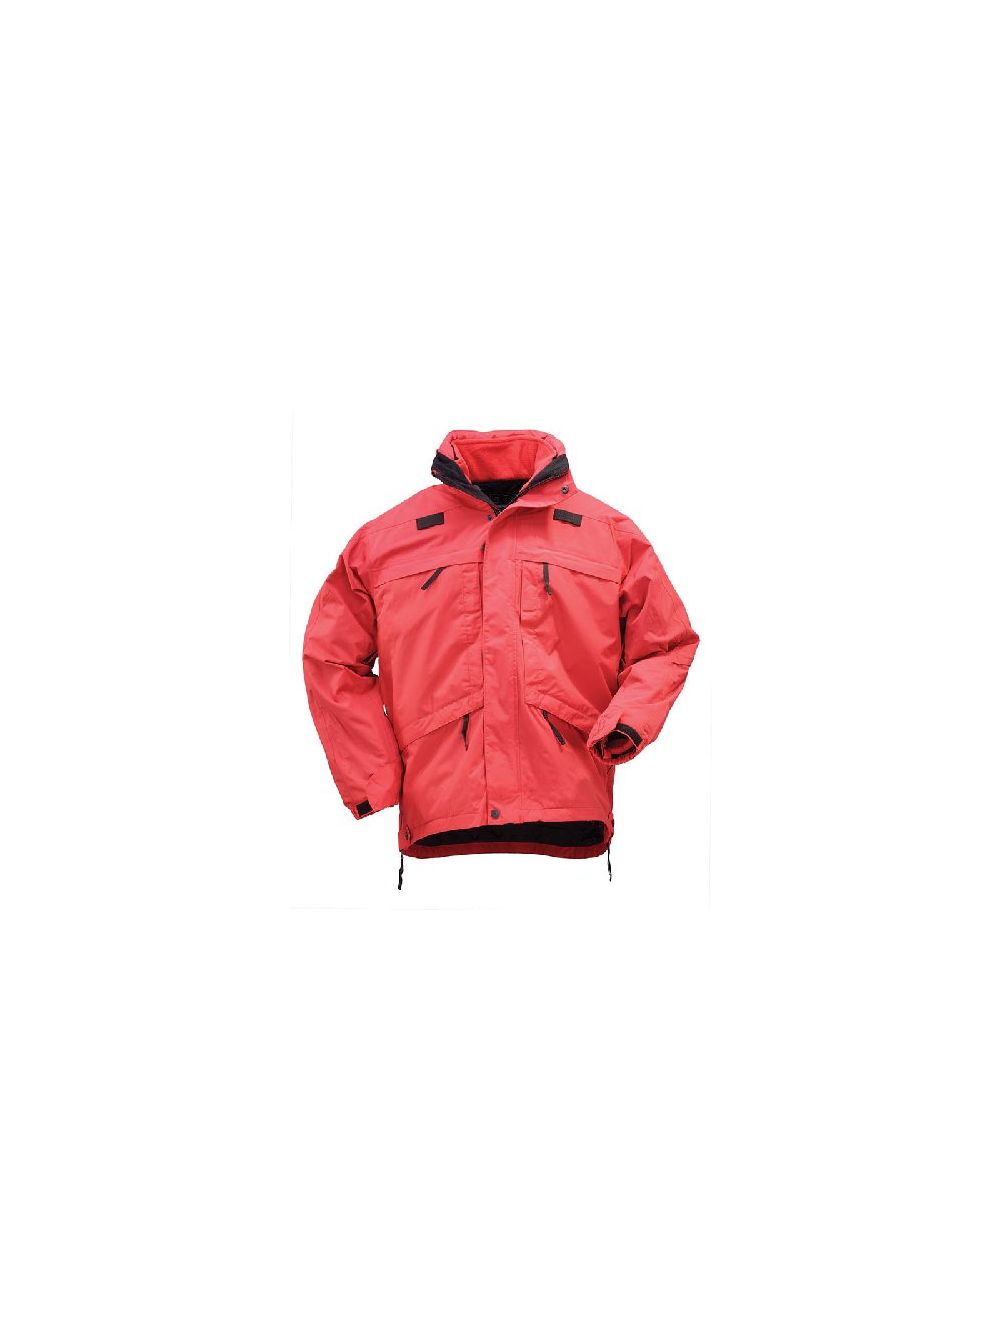 3-In-1 Jacket By 5.11 Tactical XS-2XL / Range Red